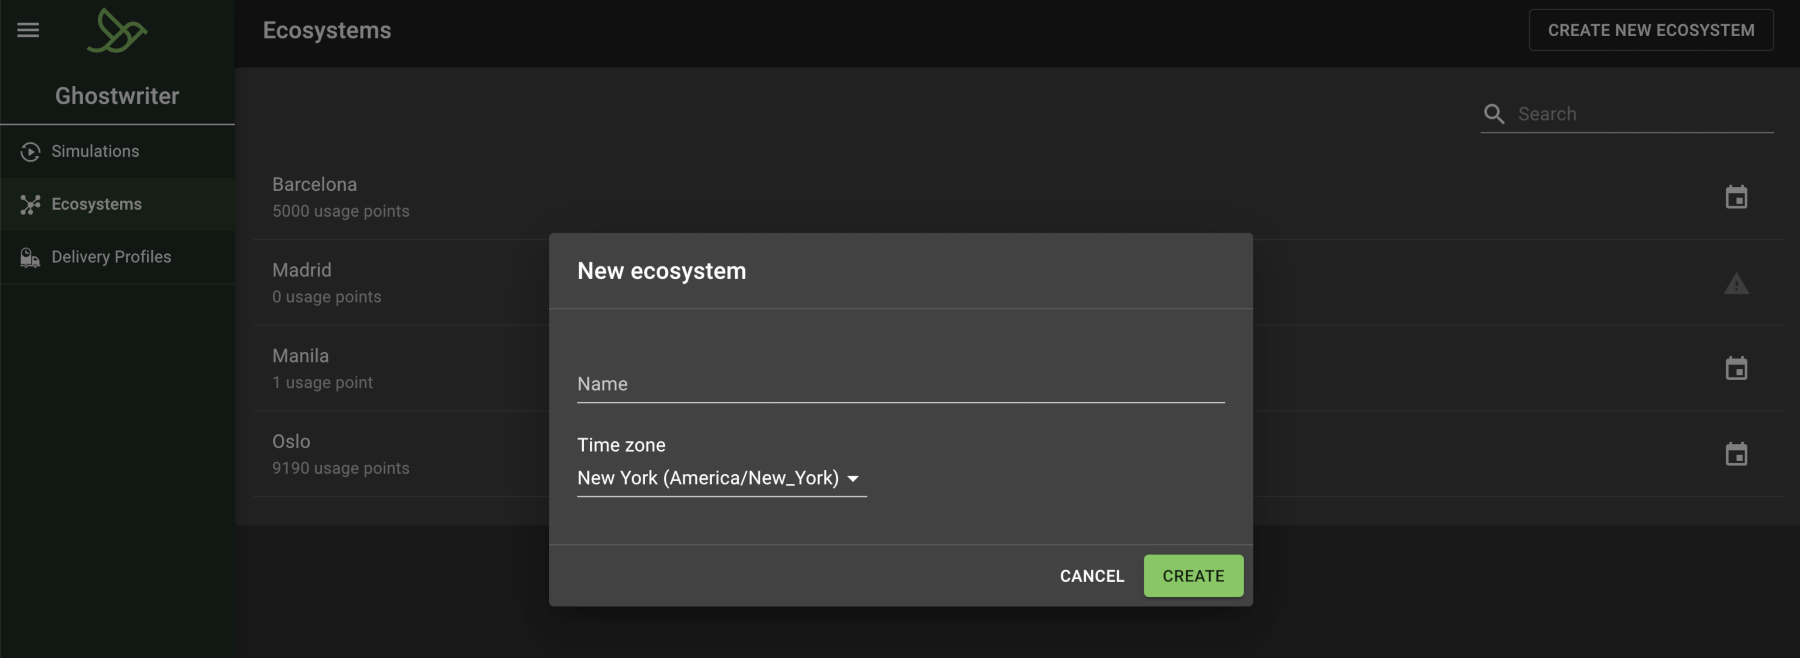 An overlay displays a form to enter an ecosystem name and select a time zone.